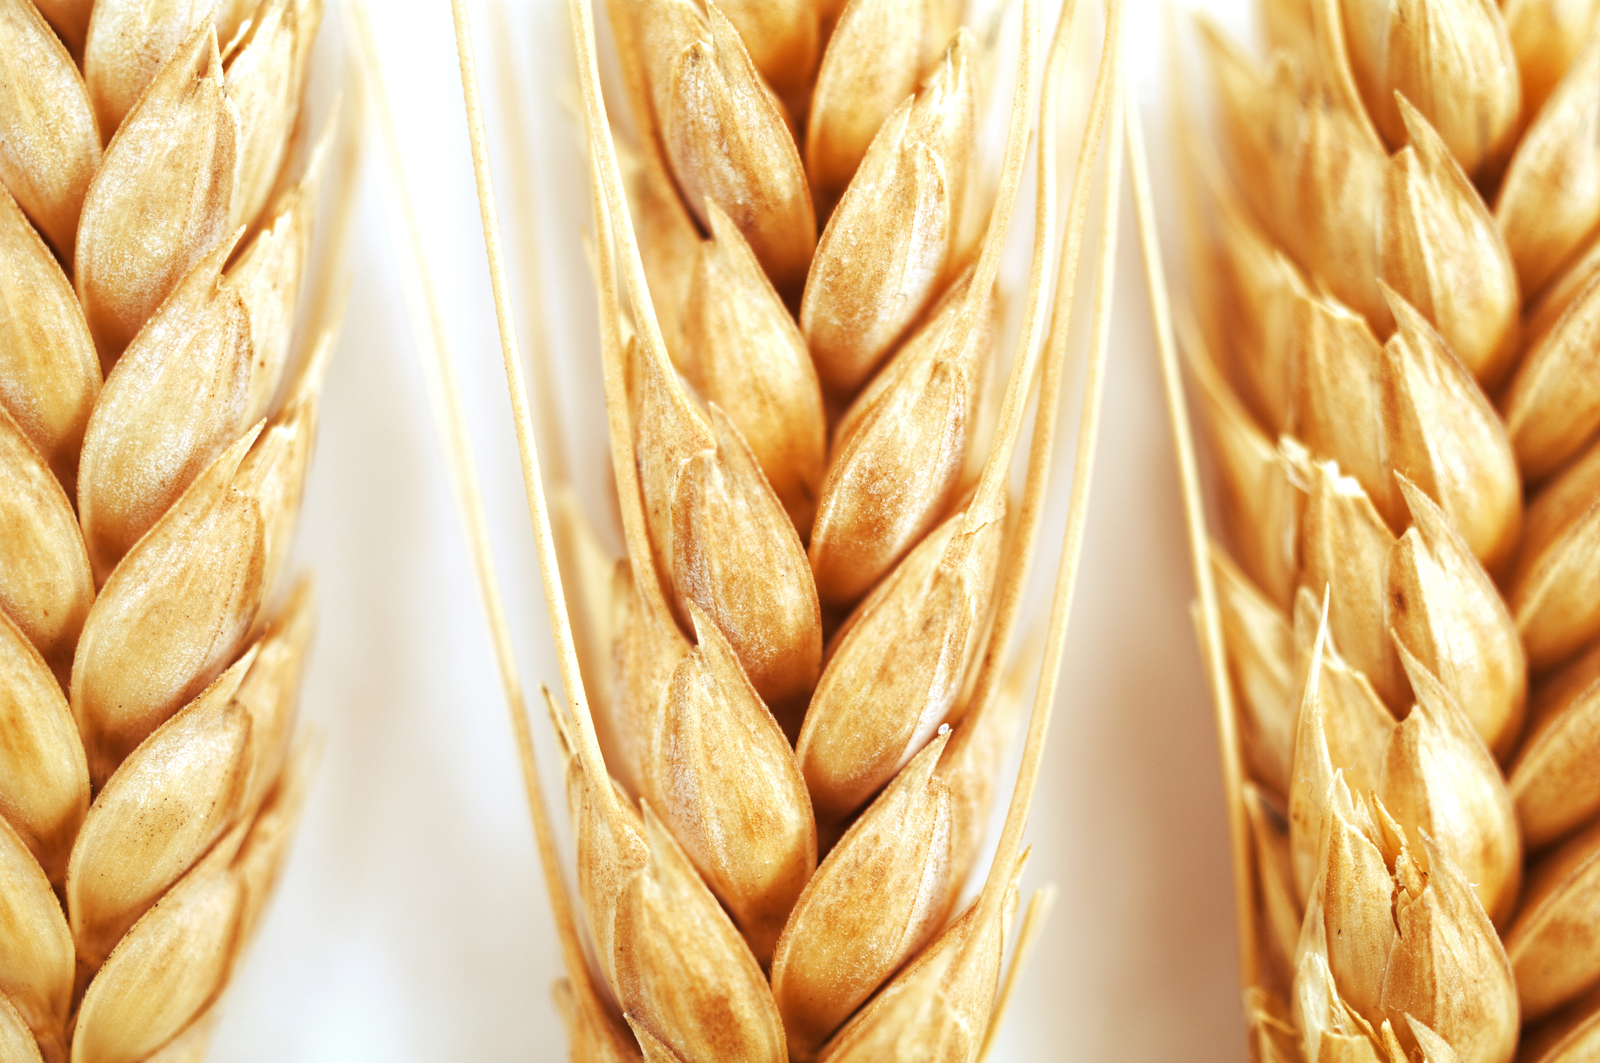 Global state of mycotoxins